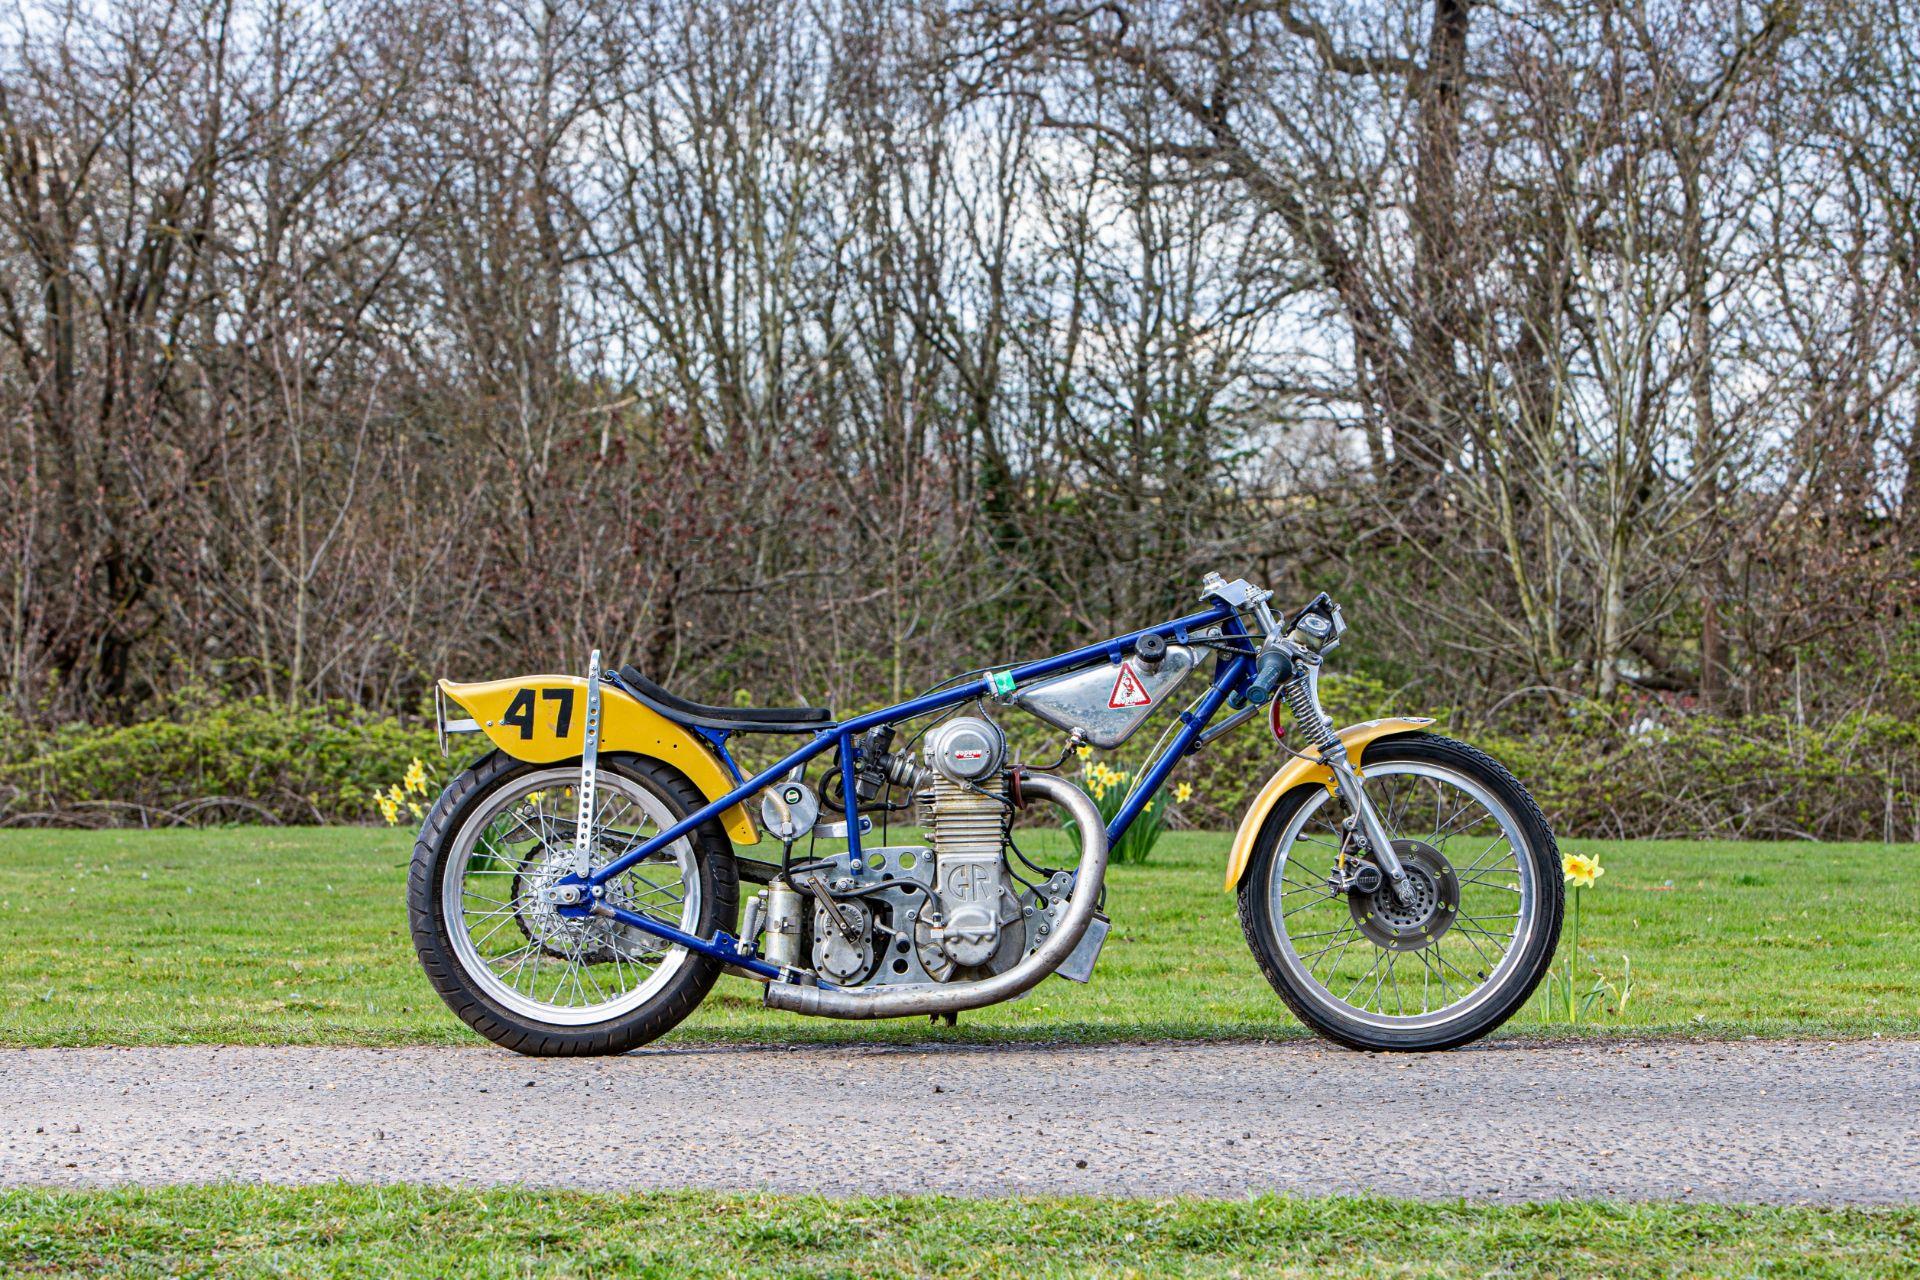 c.1980 Godden GR500 Grass-track Racing Motorcycle Frame no. to be advised Engine no. T.985